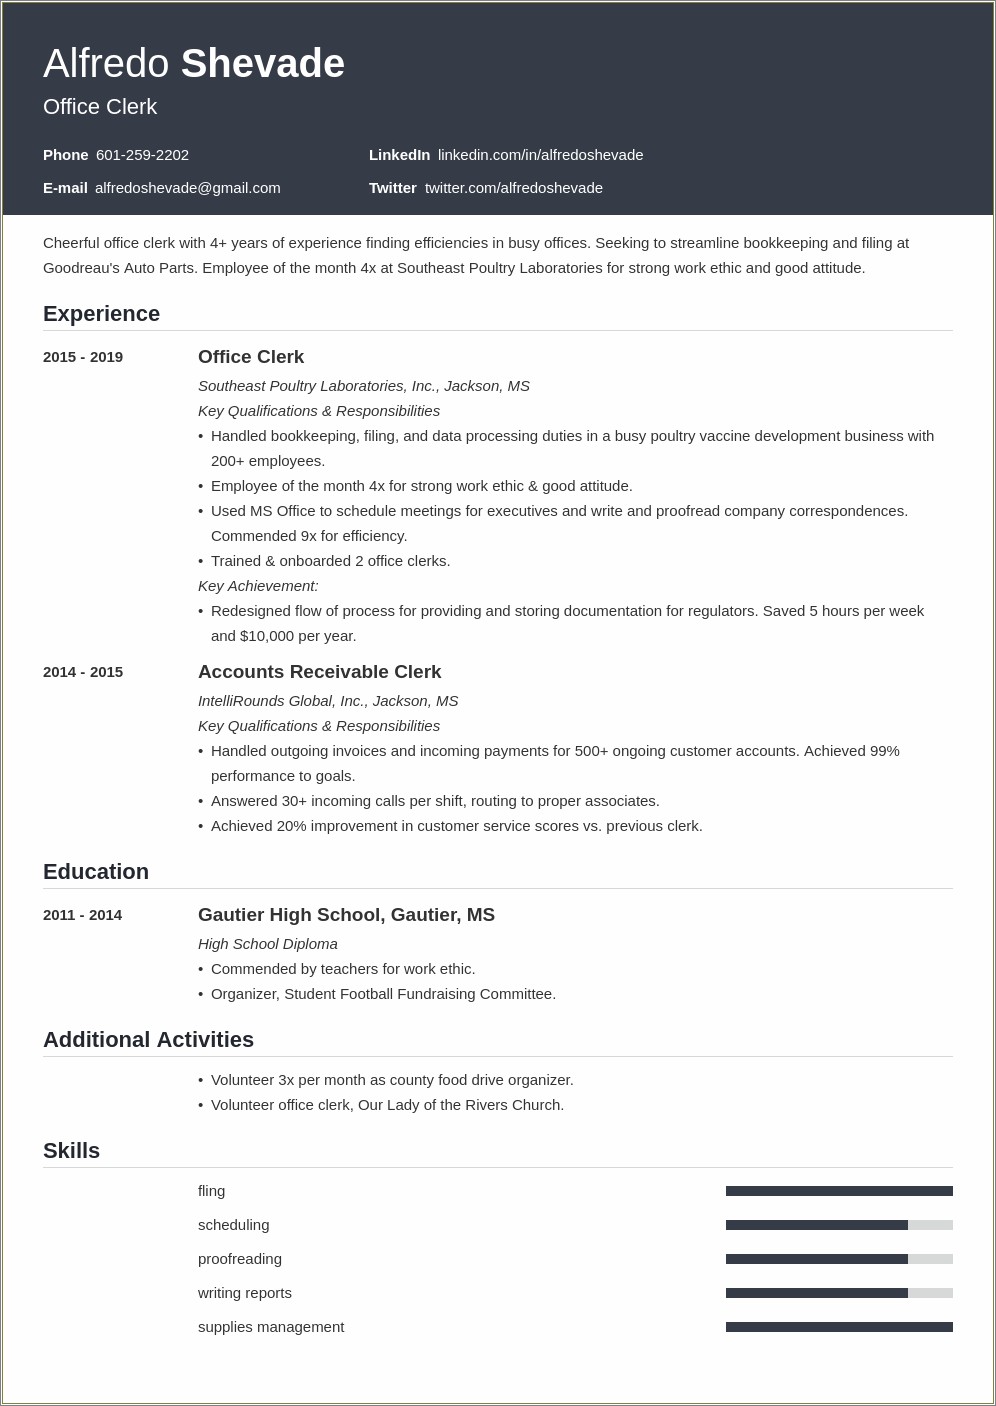 Sample Resume For Office Clerk With Experience